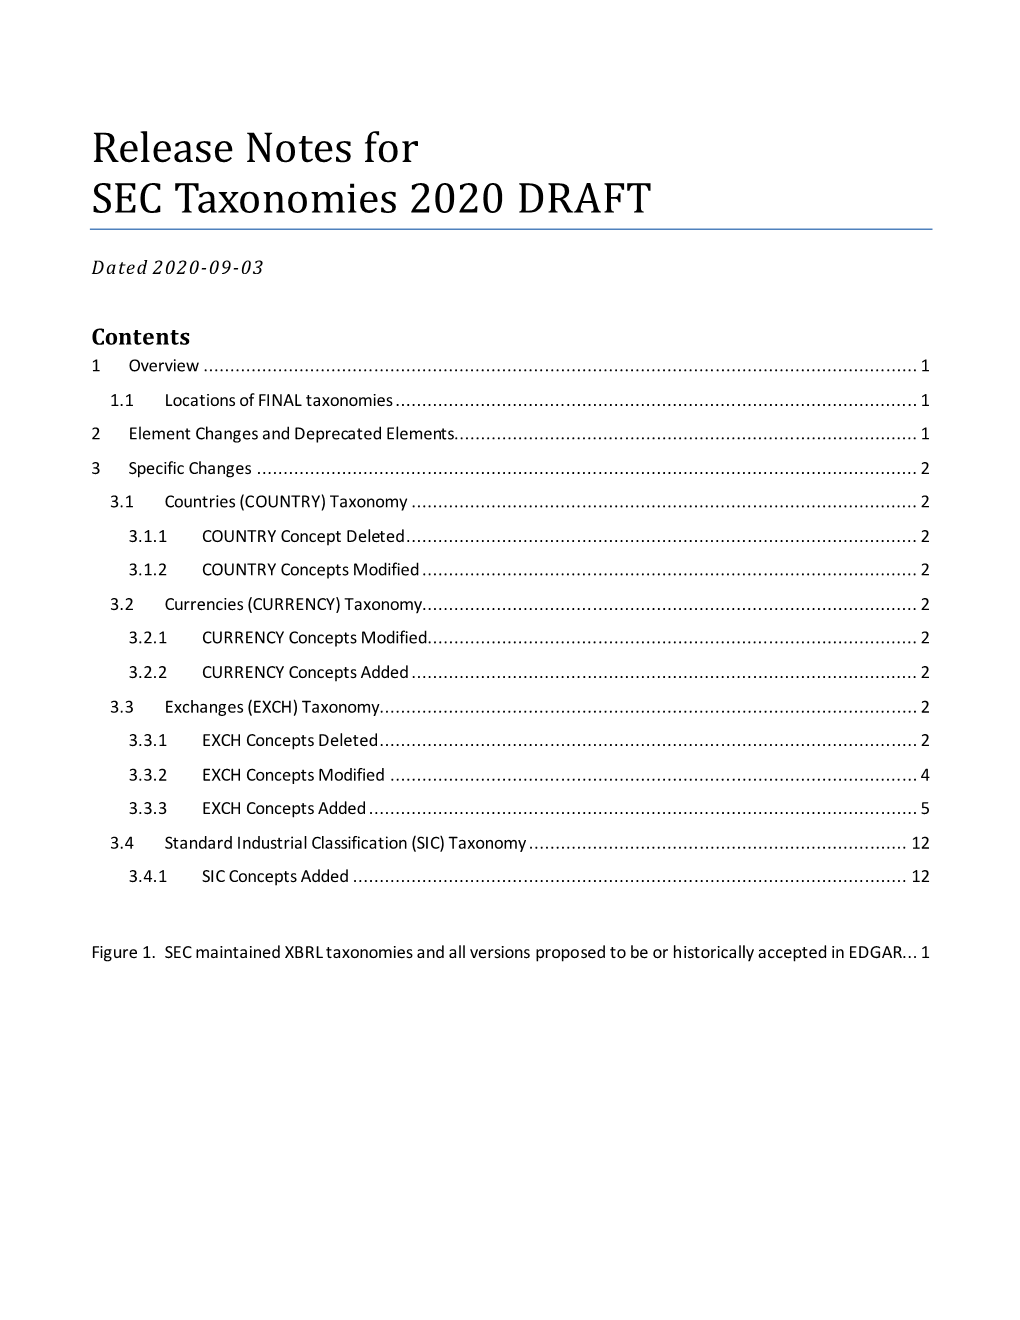 Release Notes for SEC Taxonomies 2020 DRAFT